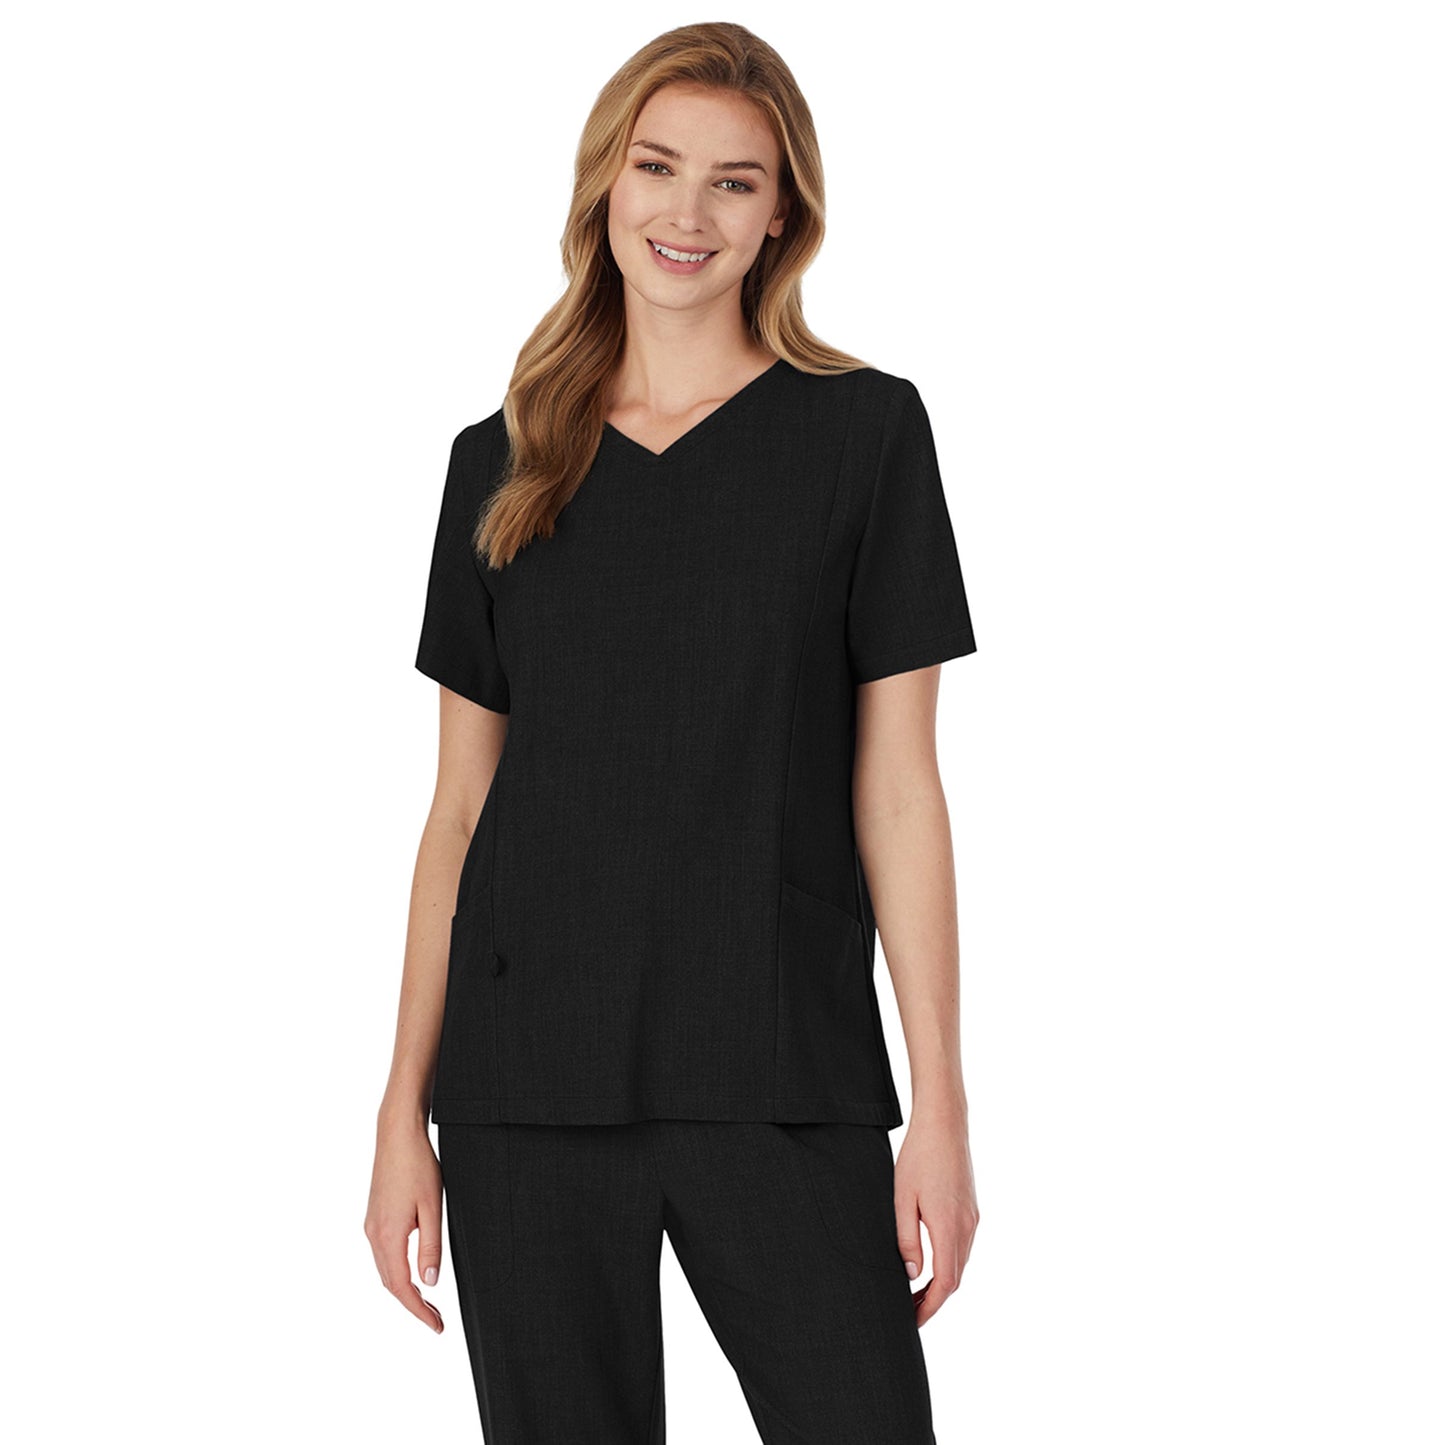 Black;Model is wearing size S. She is 5’9”, Bust 32”, Waist 23", Hips 34.5”.@A lady wearing black scrub v-neck top with side pockets.